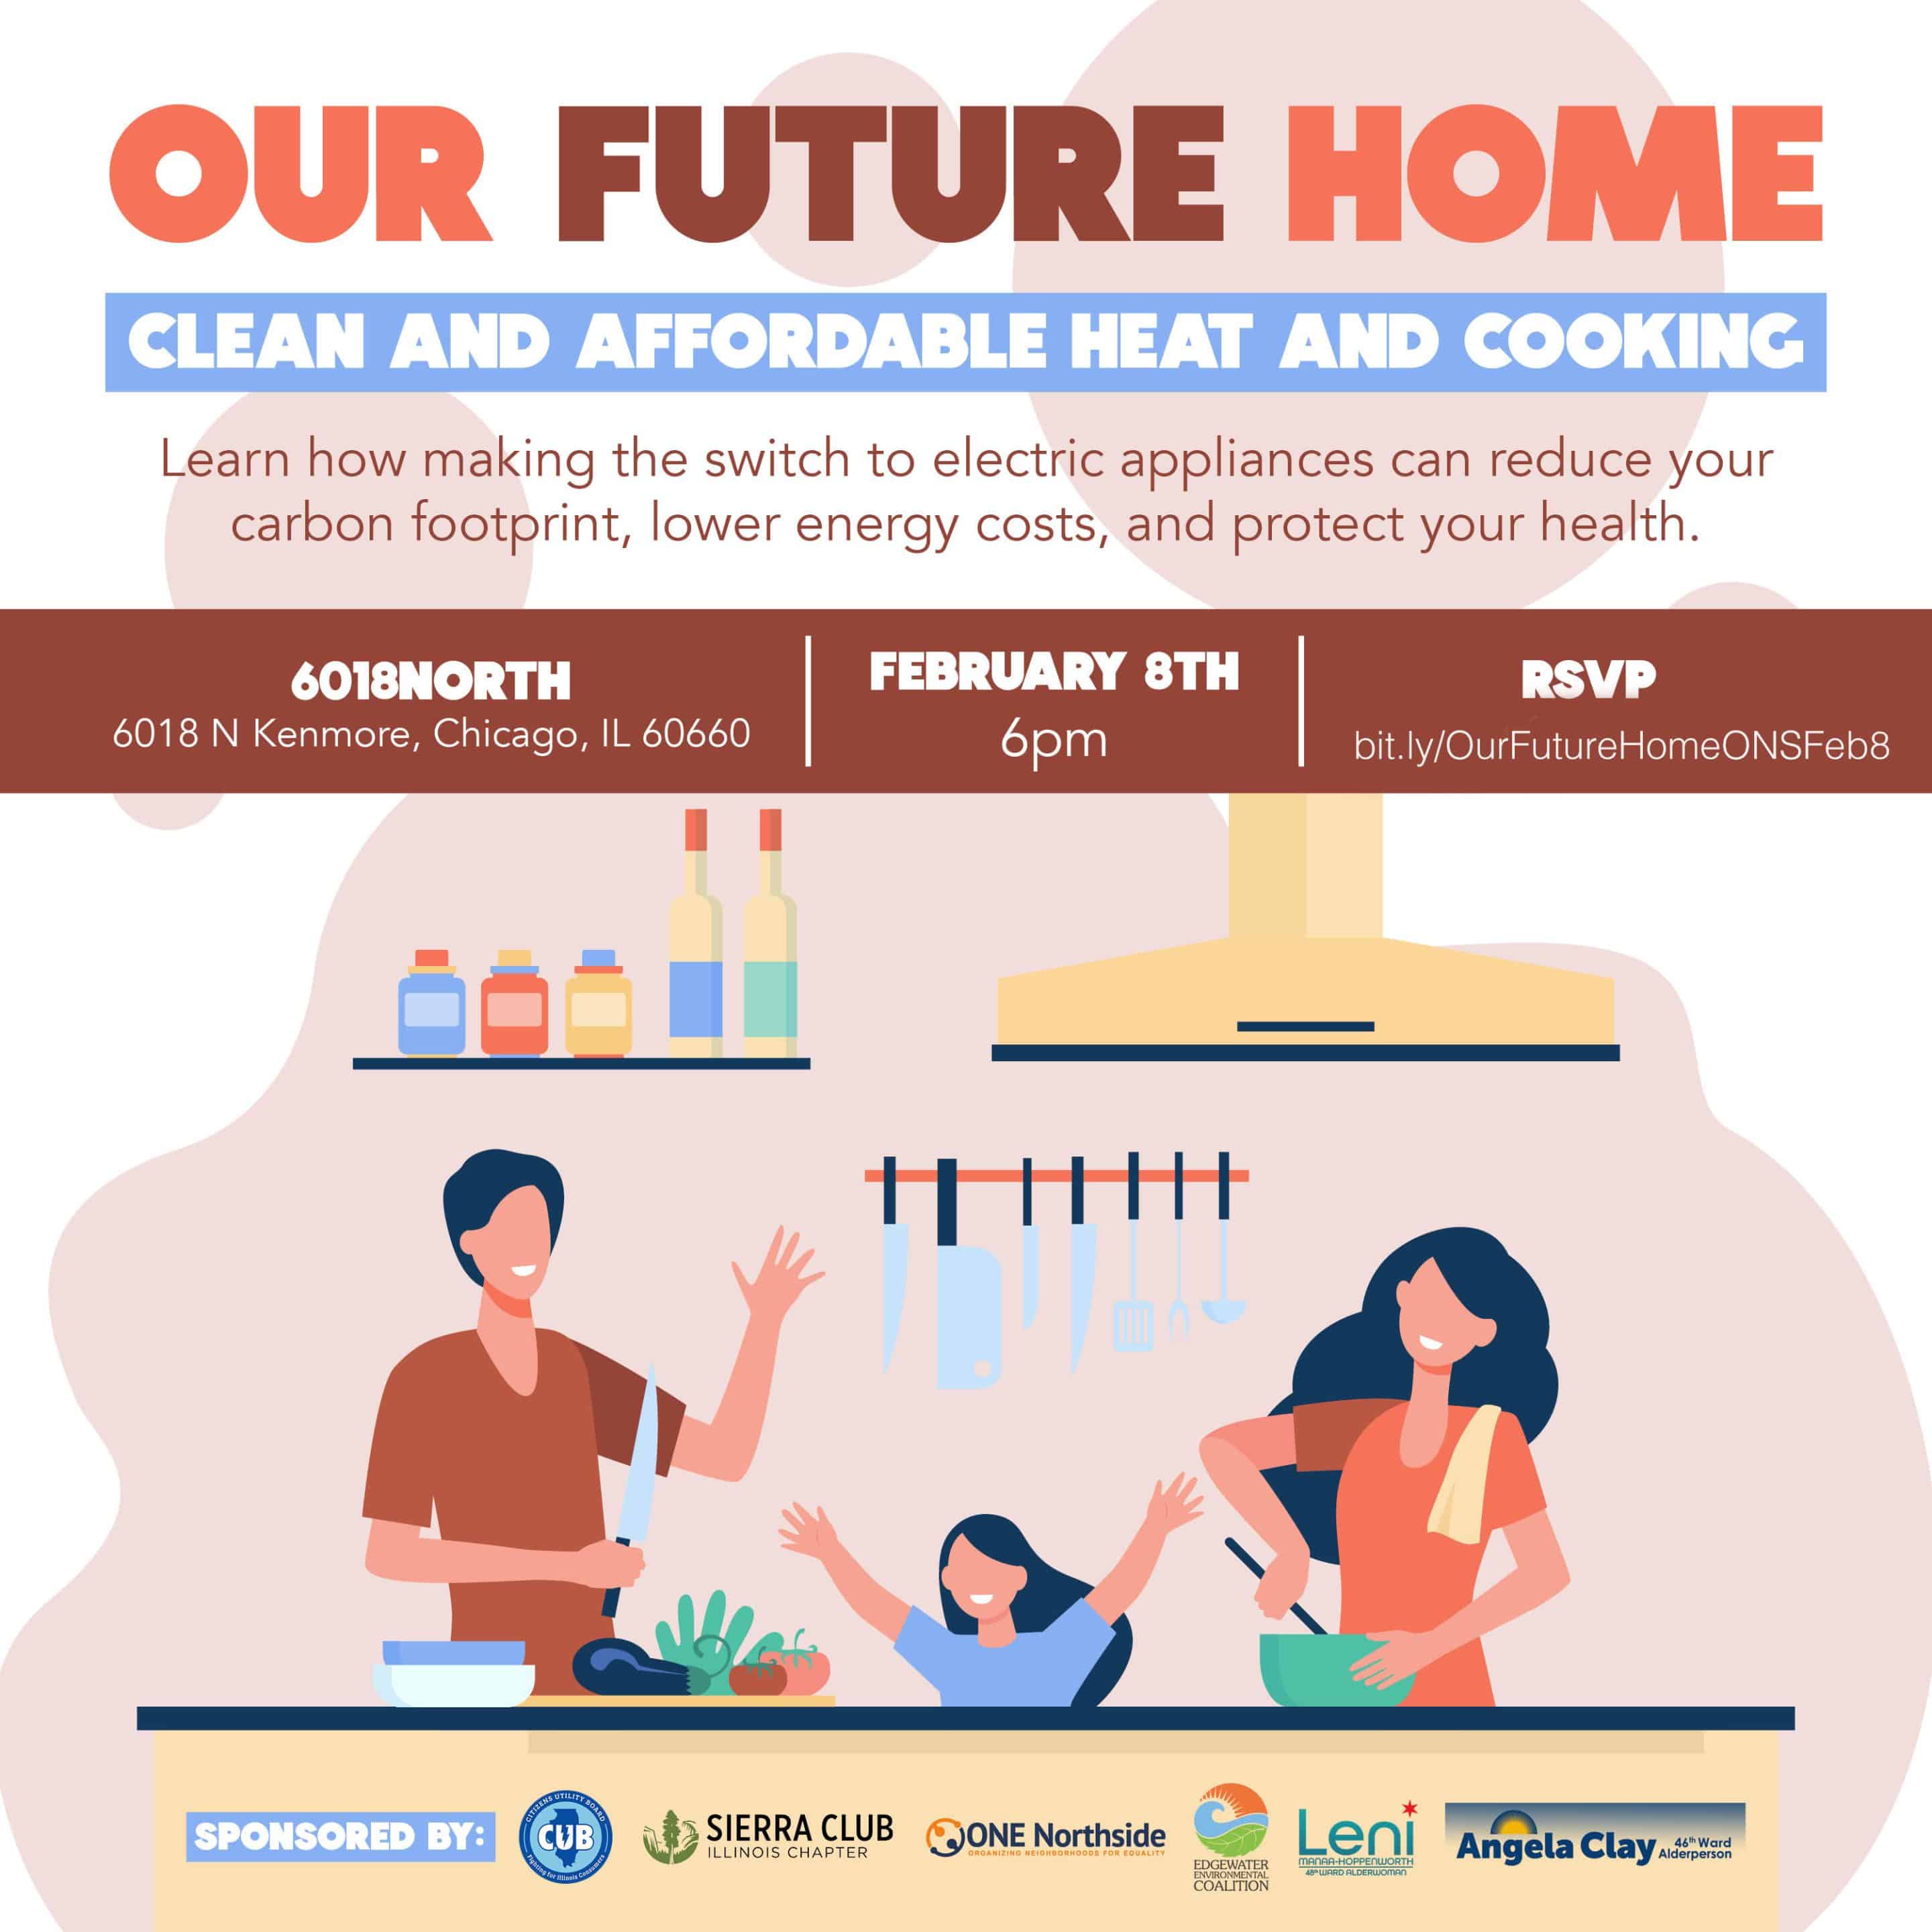 Our Future Home: Clean and Affordable Heat and Cooking Event with ONE Northside